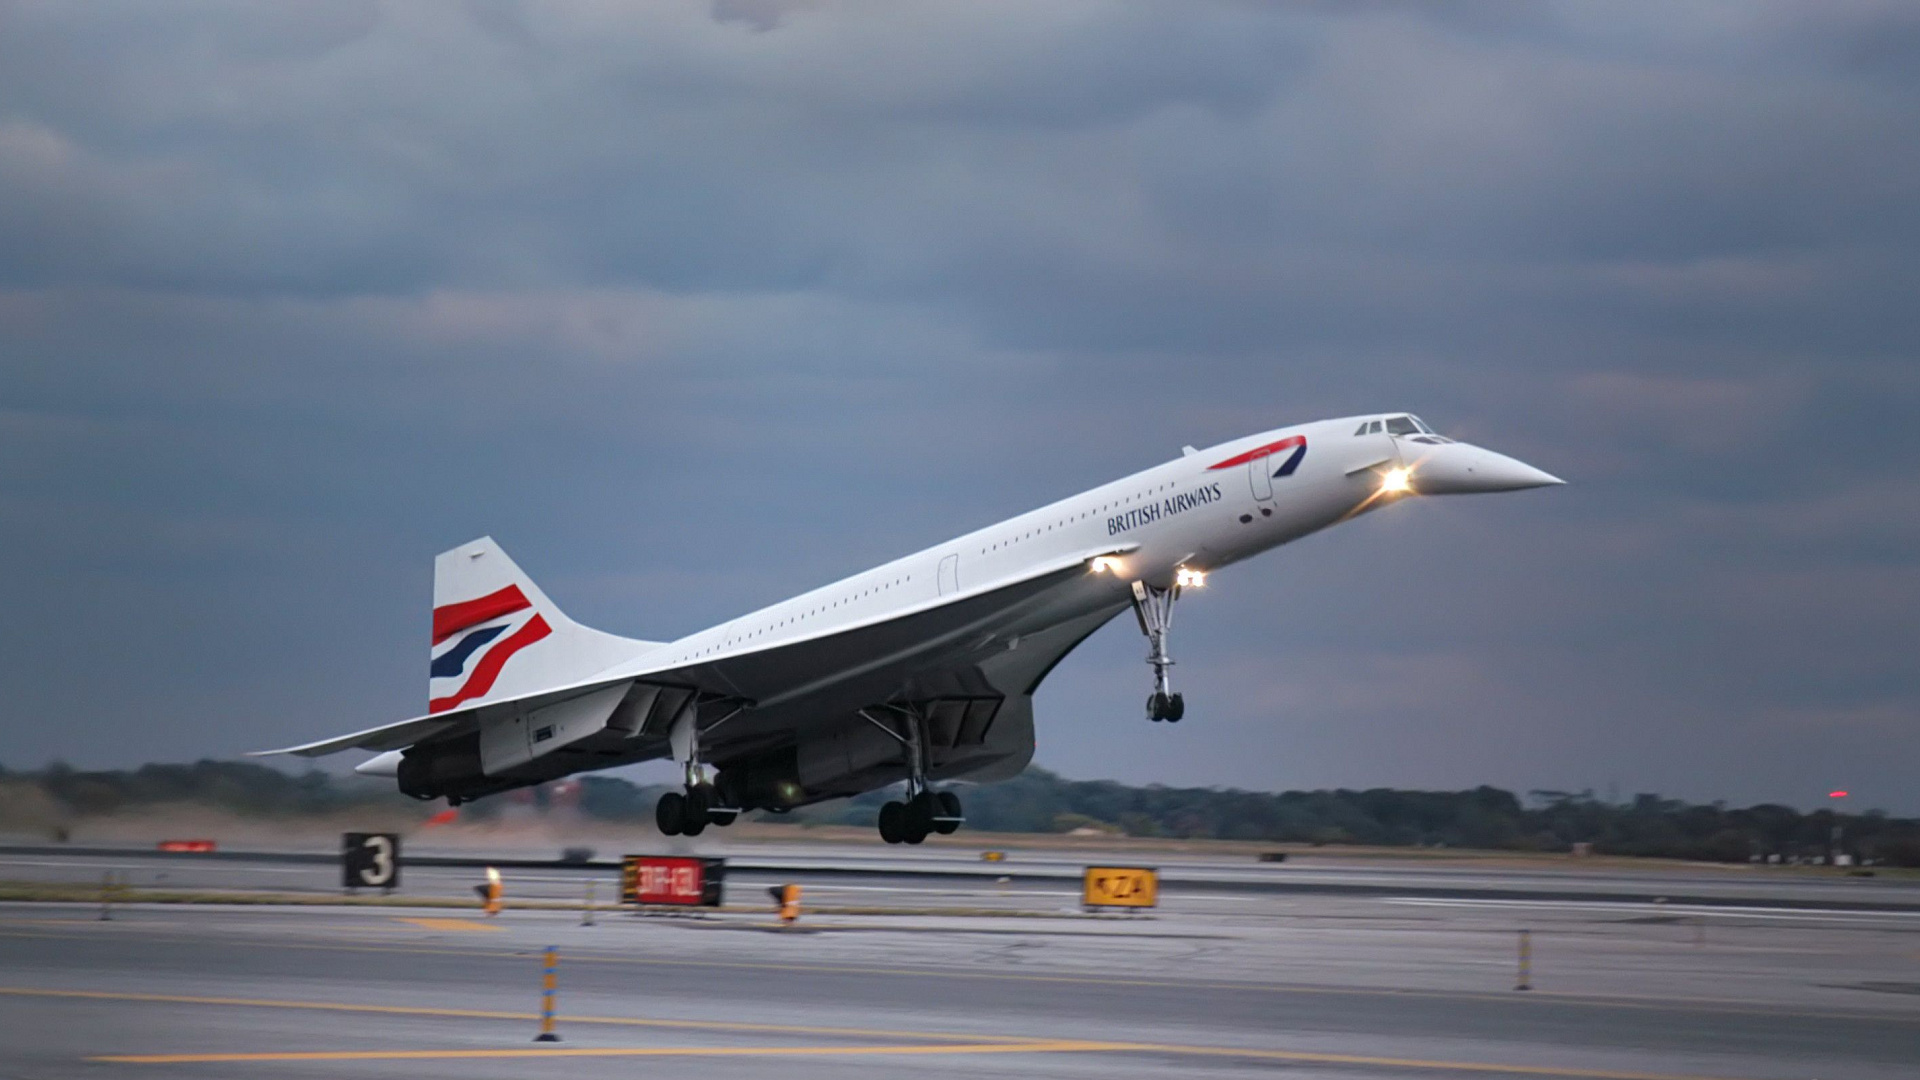 Aircraft: The Aérospatiale/BAC Concorde, Supersonic airliner. 1920x1080 Full HD Wallpaper.